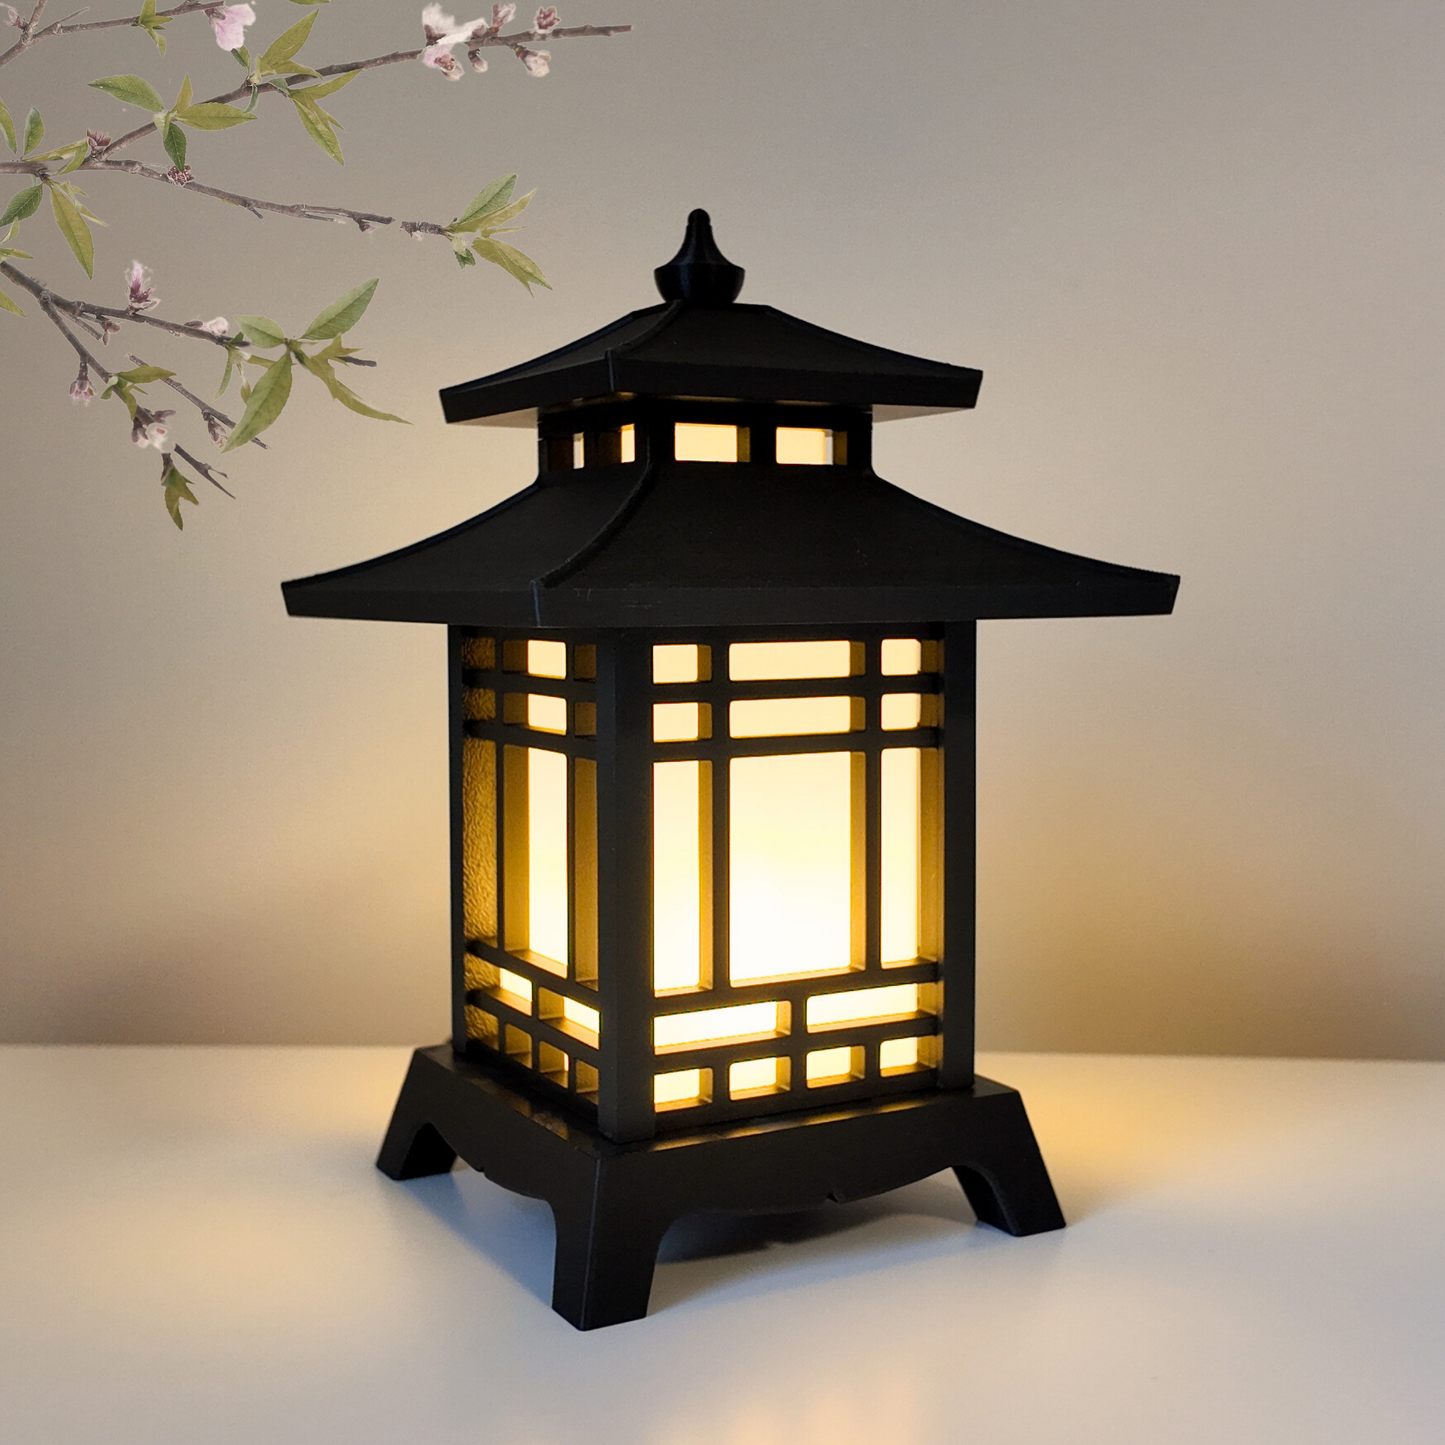 Japanese Pagoda Lantern - Exquisite Japanese Decor for Home and Room | Unique Desk Lamp and Table Lamp Design | Mini Pagoda Transforms Any Space